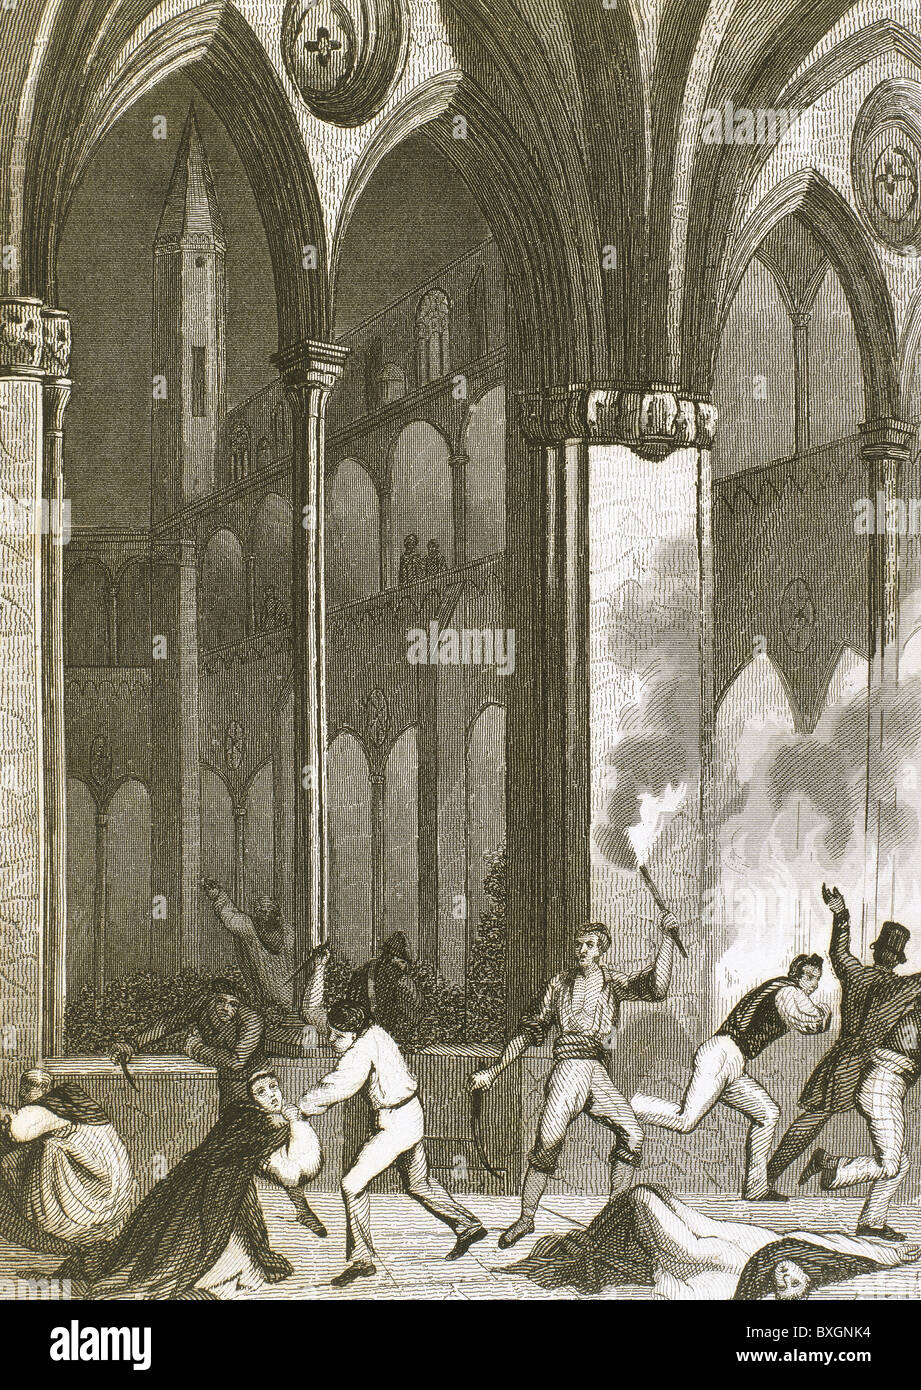 Fire in the Convent of Saint Catherine in 1835. Barcelona. Catalonia. Spain. Nineteenth-century engraving. Stock Photo